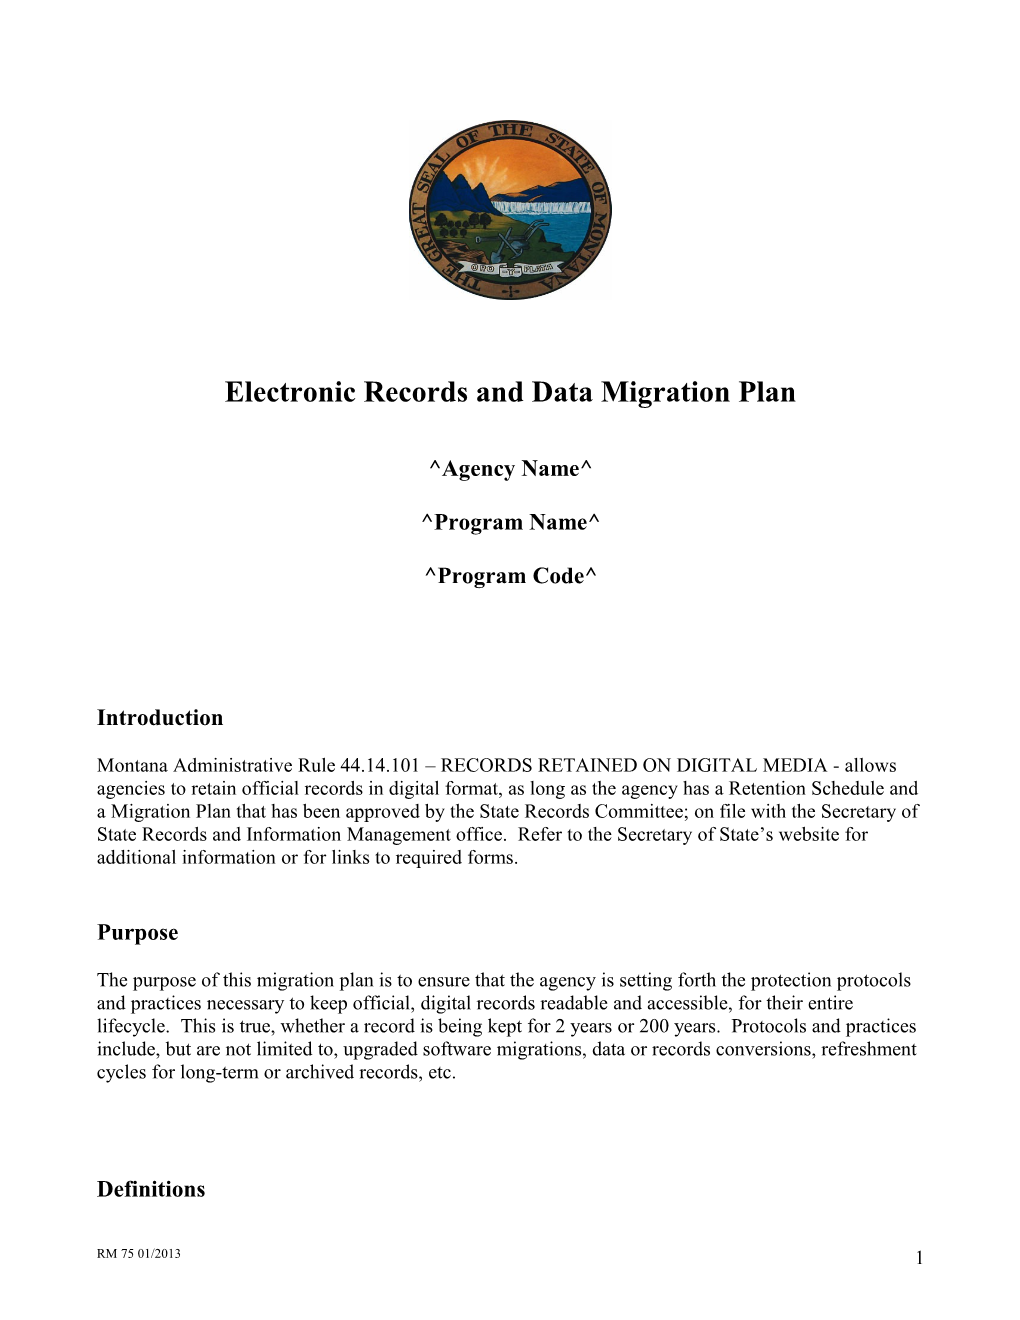 Electronic Records and Data Migration Plan